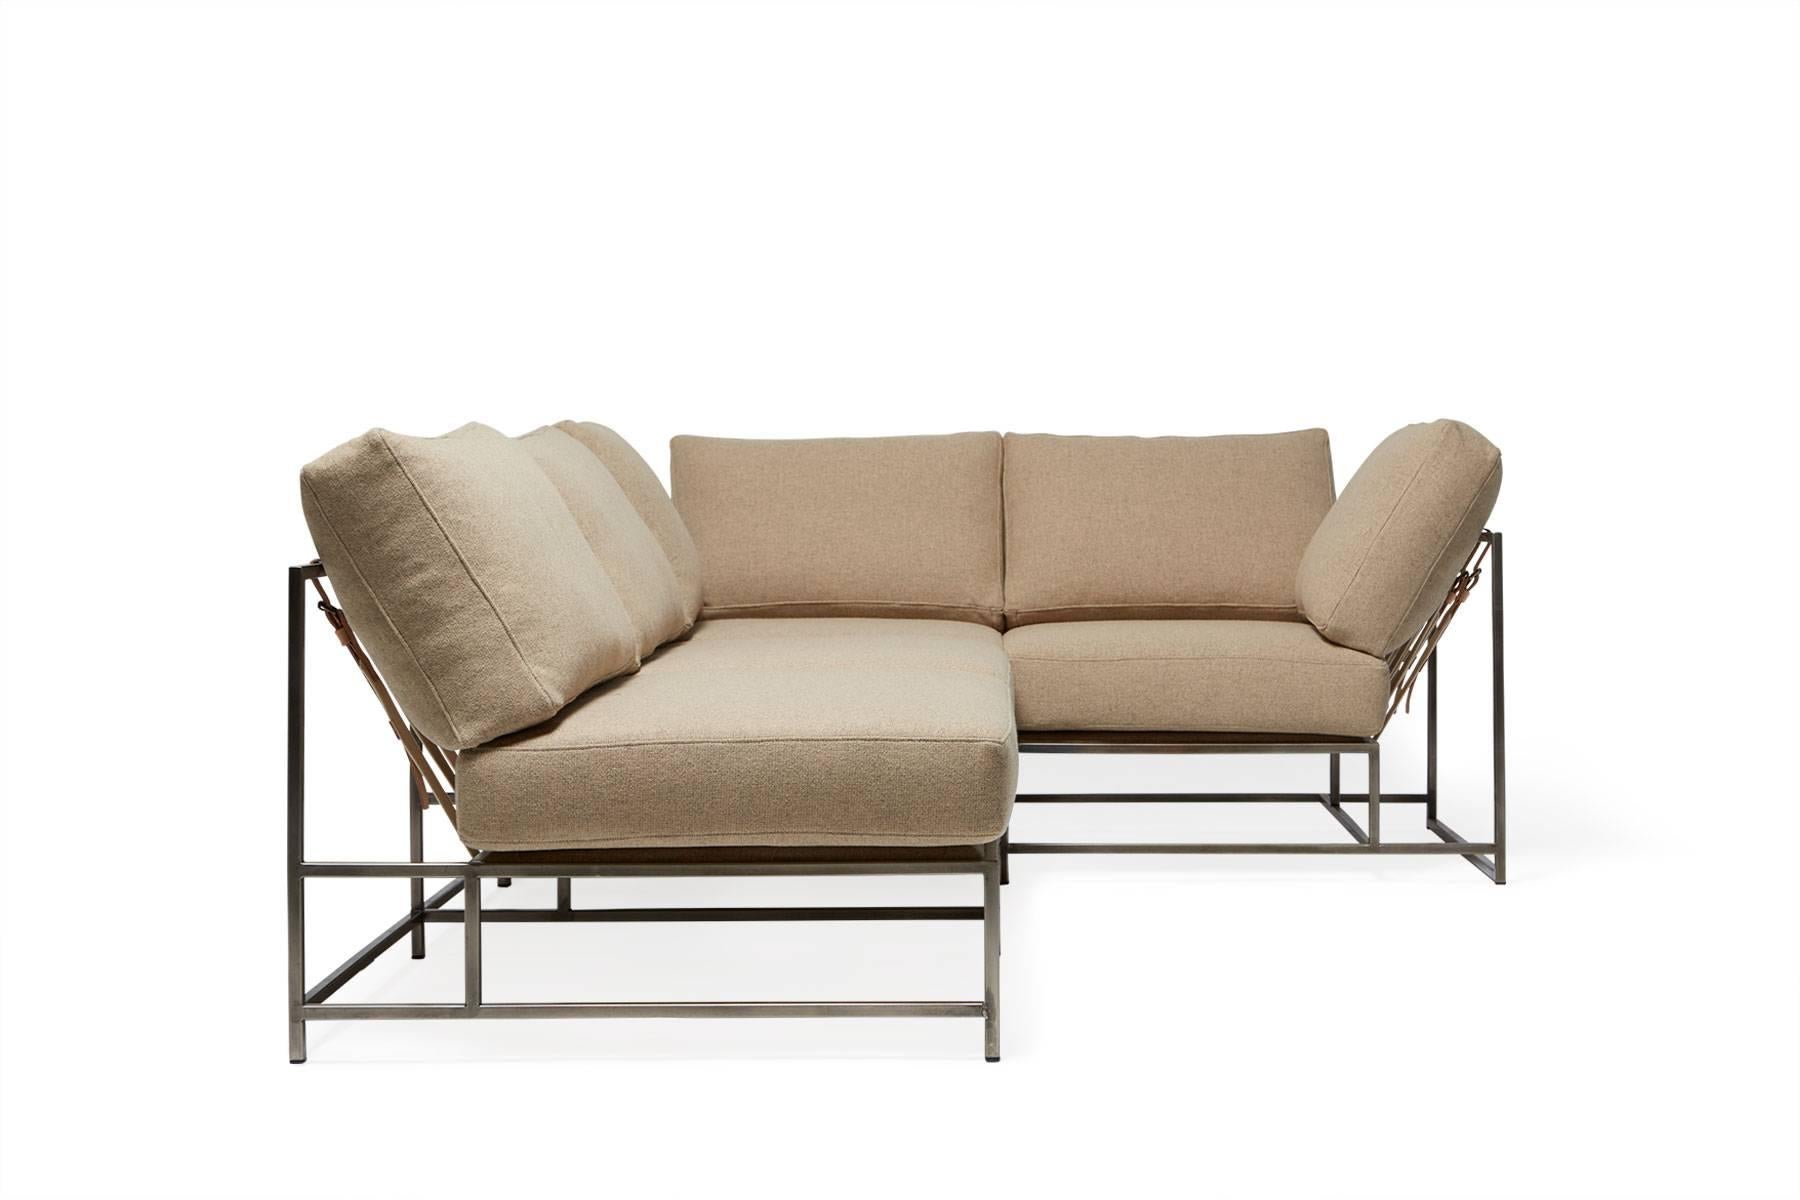 Our sectionals are great ways to customize your space and create the ultimate lounge spaces. 

This variation is upholstered in  a warm tan wool. The foam seat cushions have been wrapped in polyfiber, allowing for a soft and comfortable lounge